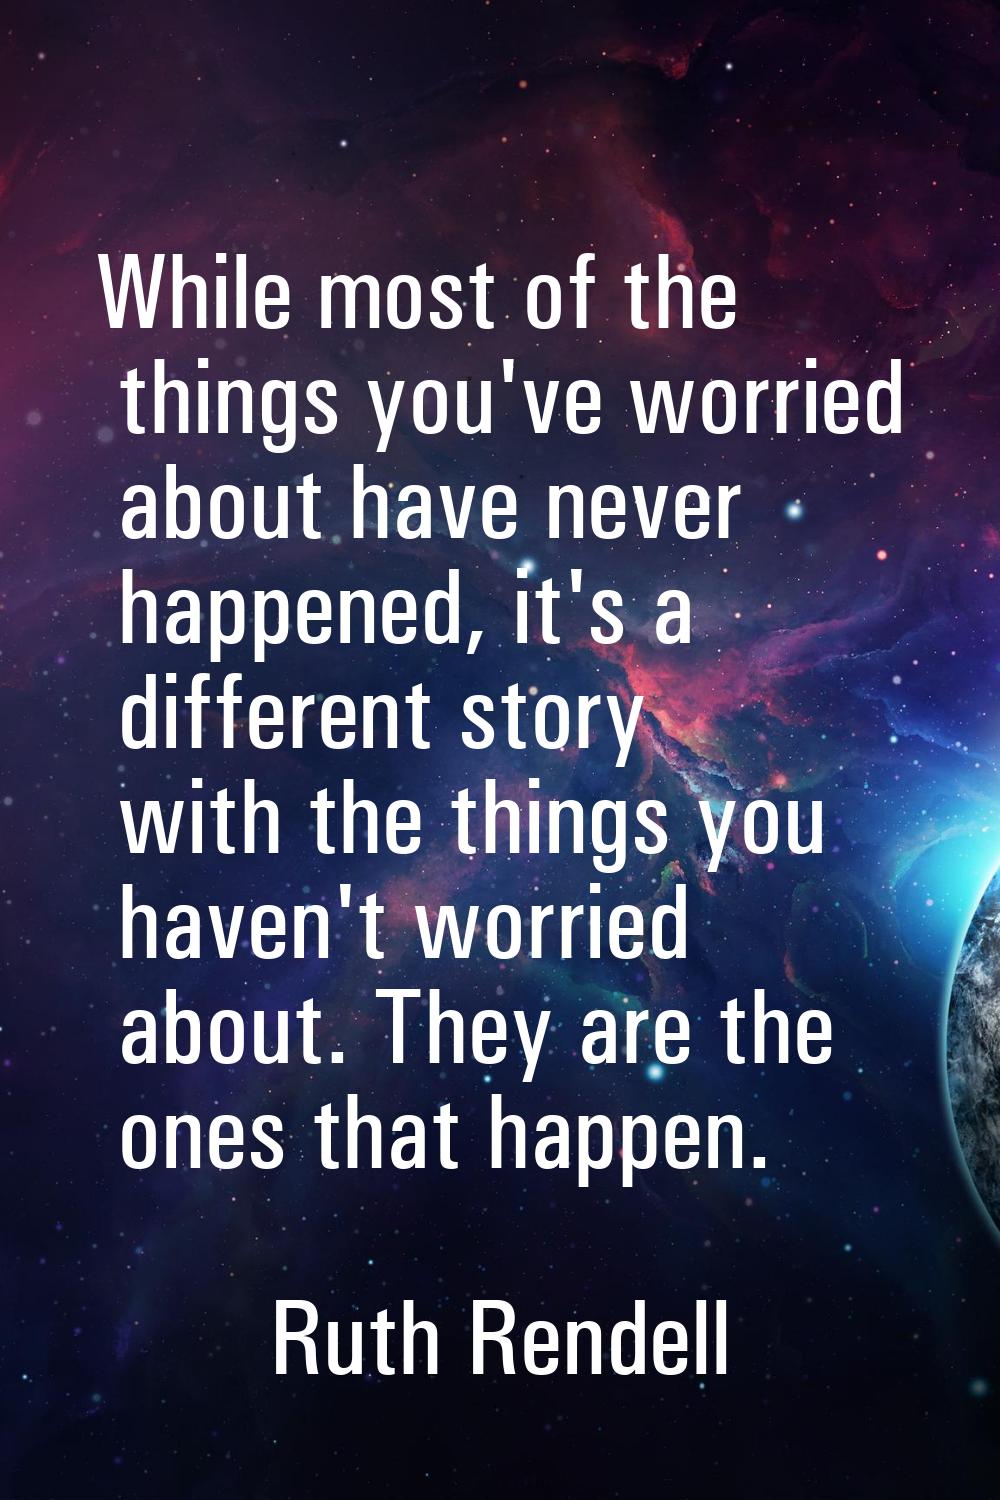 While most of the things you've worried about have never happened, it's a different story with the 